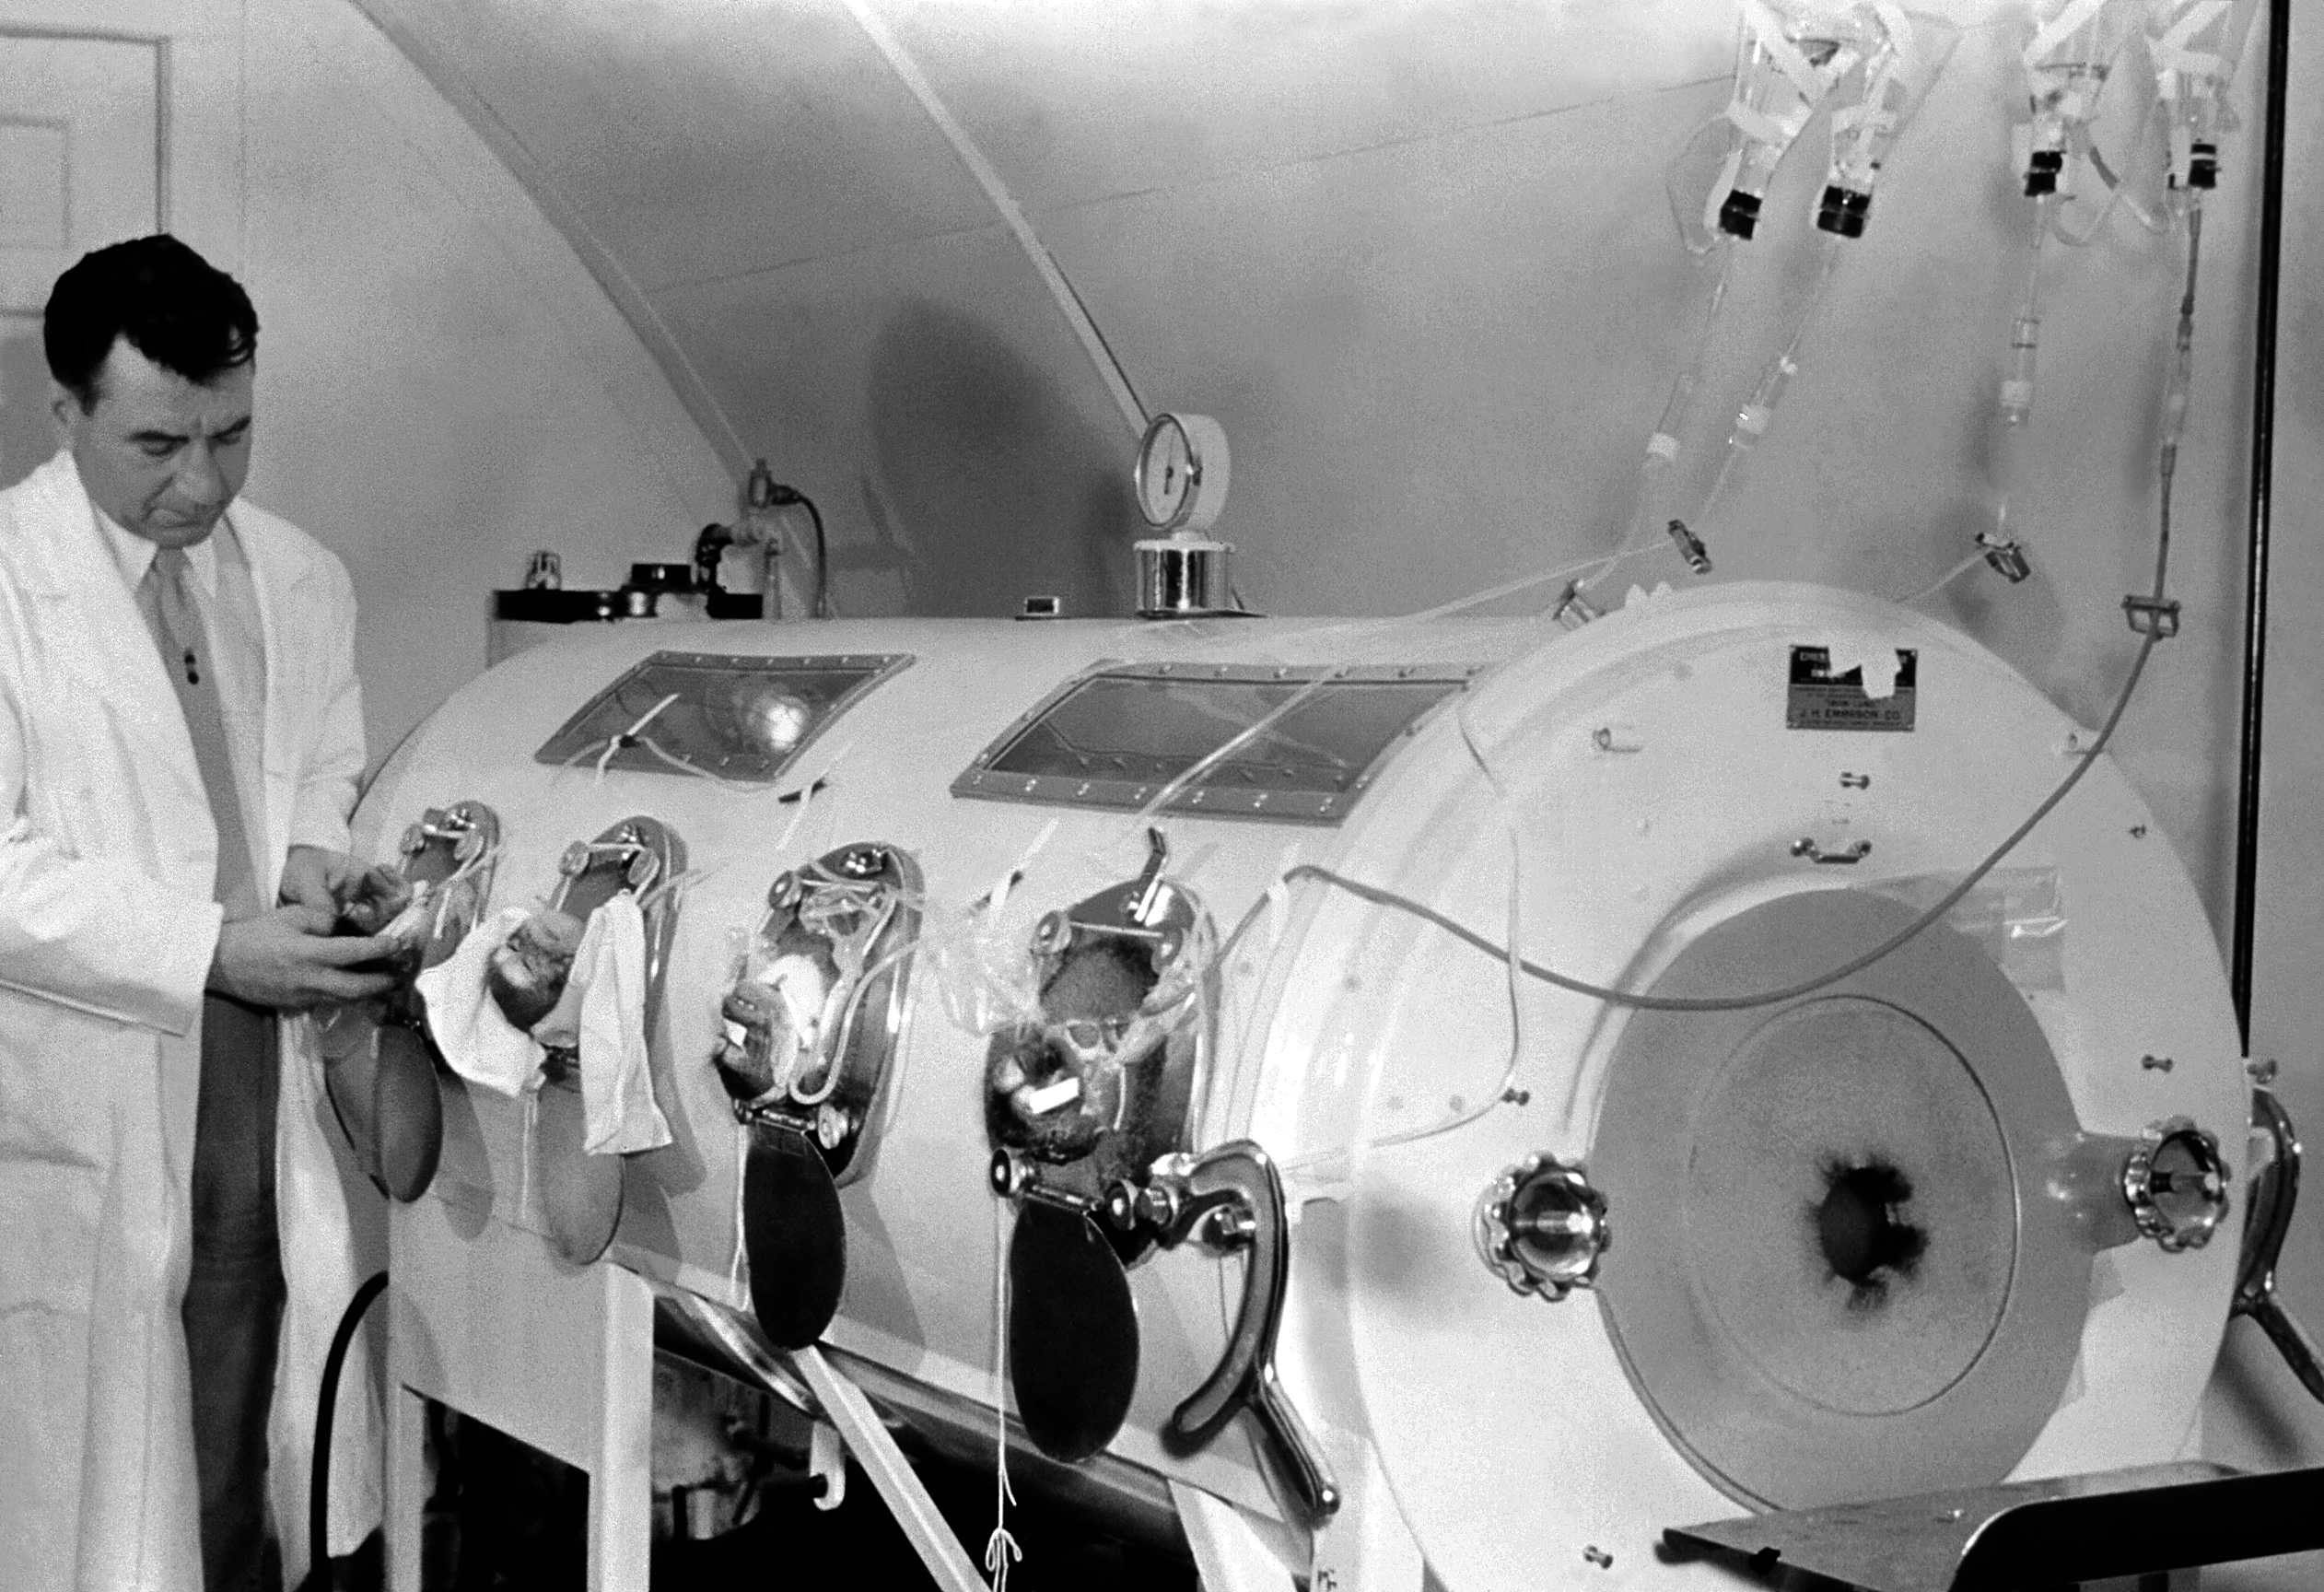 Iron lung used for polio patients. Courtesy U.S. Centers for Disease Control and Prevention